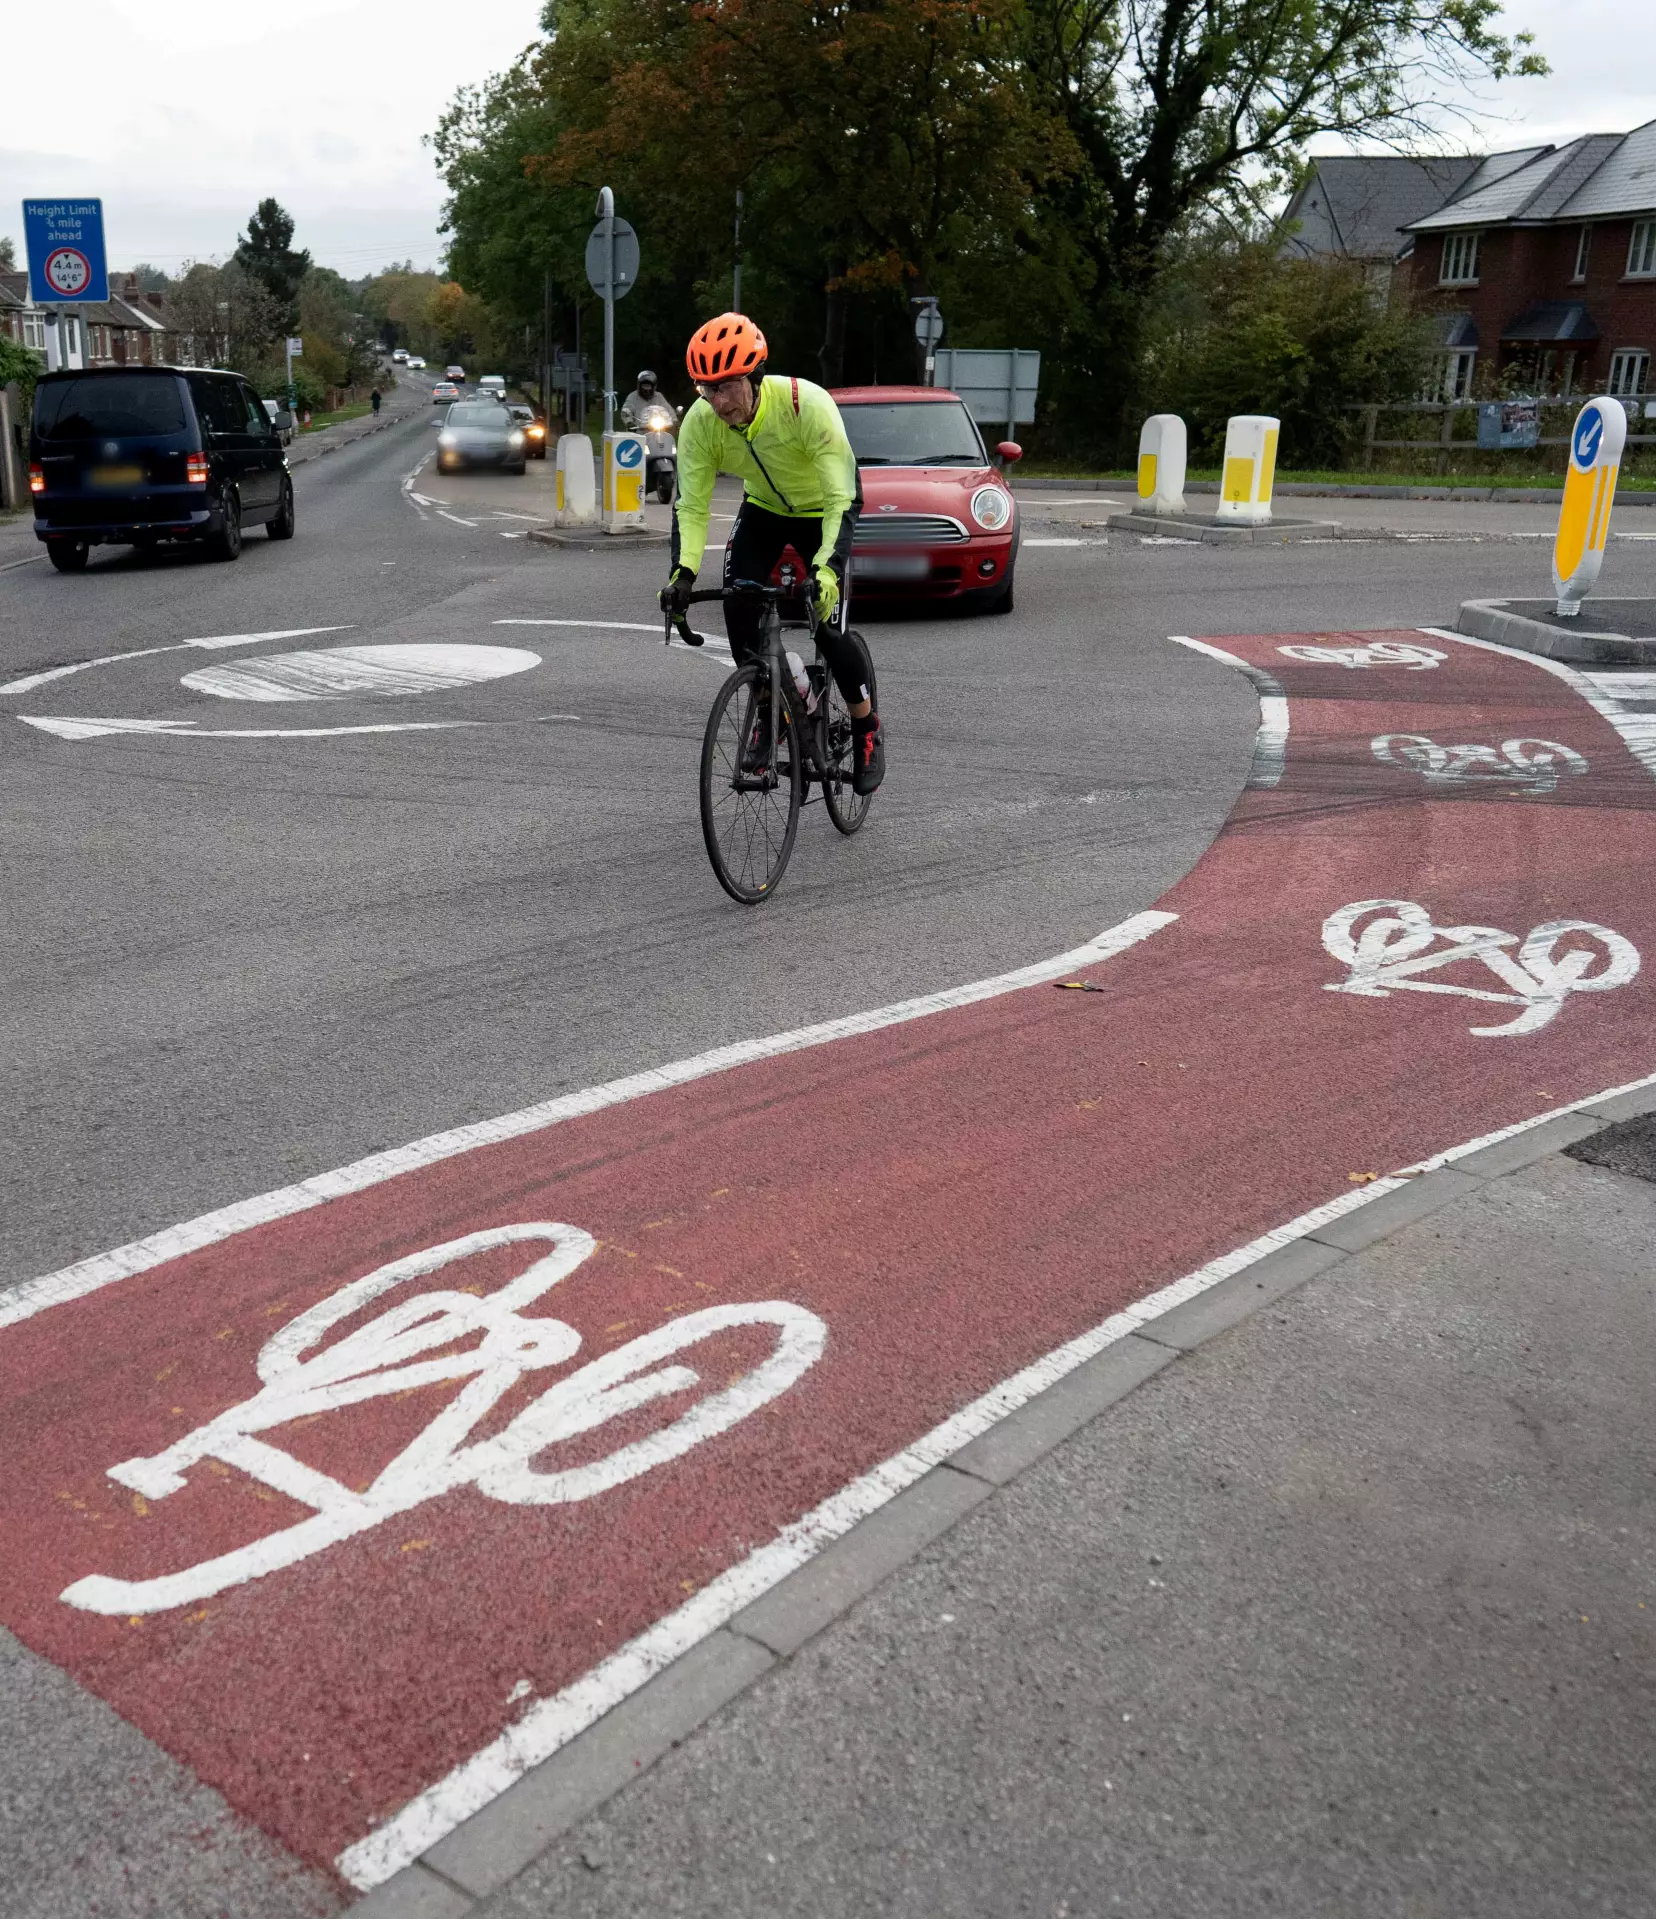 The council claims it isn't actually a cycle lane.